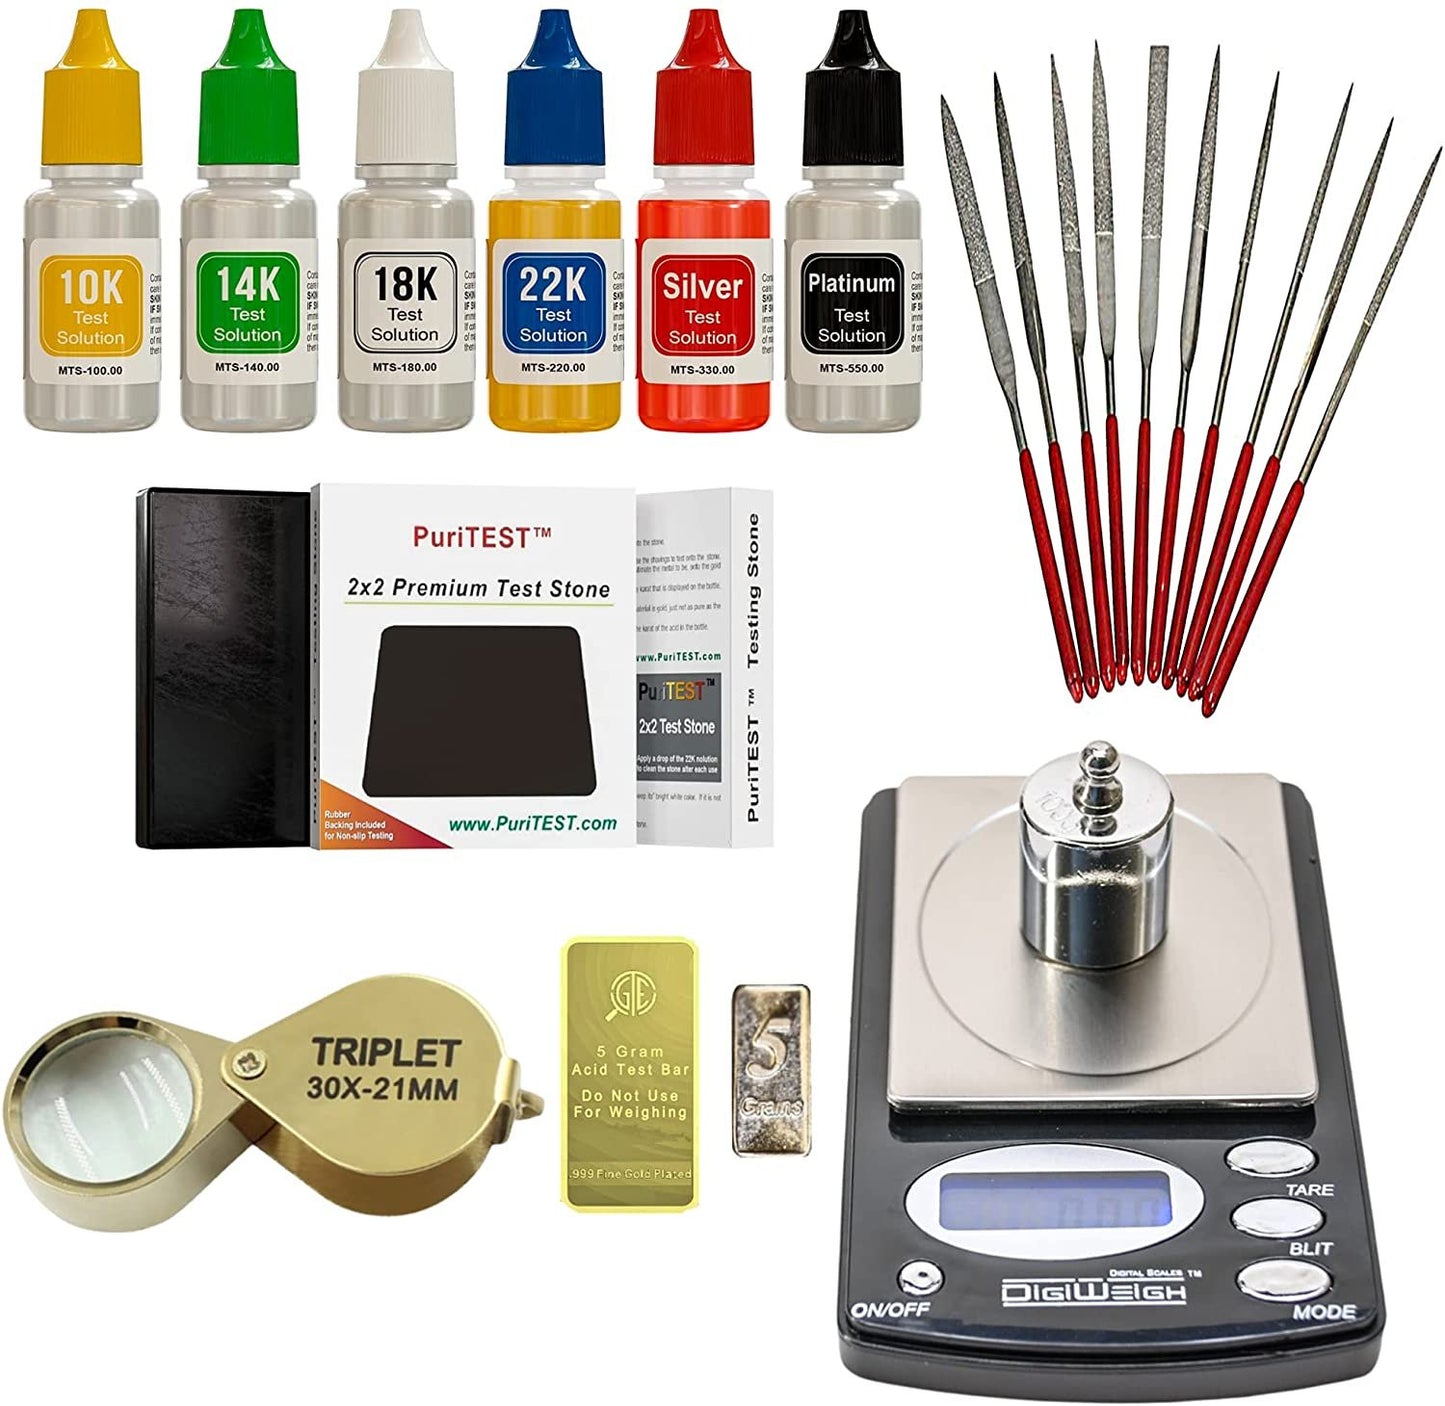 Precious Metal Testing Supplies Digital Scale + Gold/Silver/Platinum Testing Kit + PRO Test Stone + Eye Loupe + 10pcs File Tool Set + Real Solid Silver/Plated Fake Gold